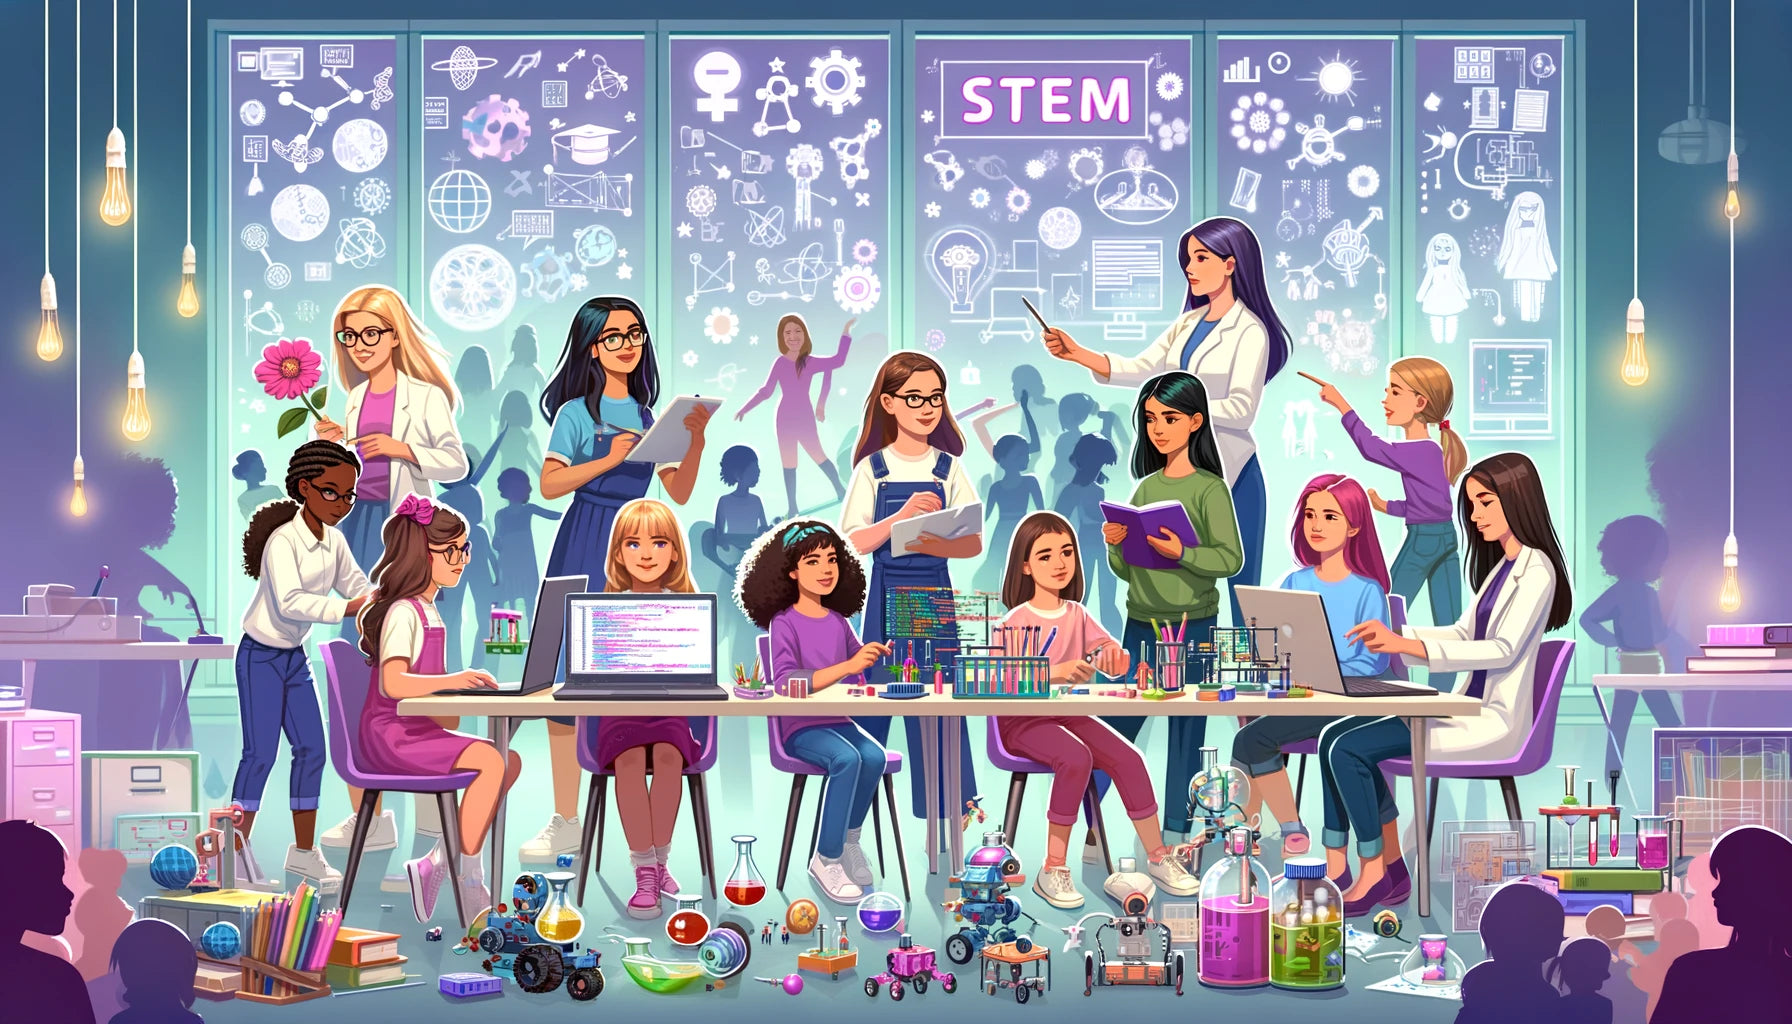 Should We Encourage More Girls to Get Involved in Learning STEM Subjects?